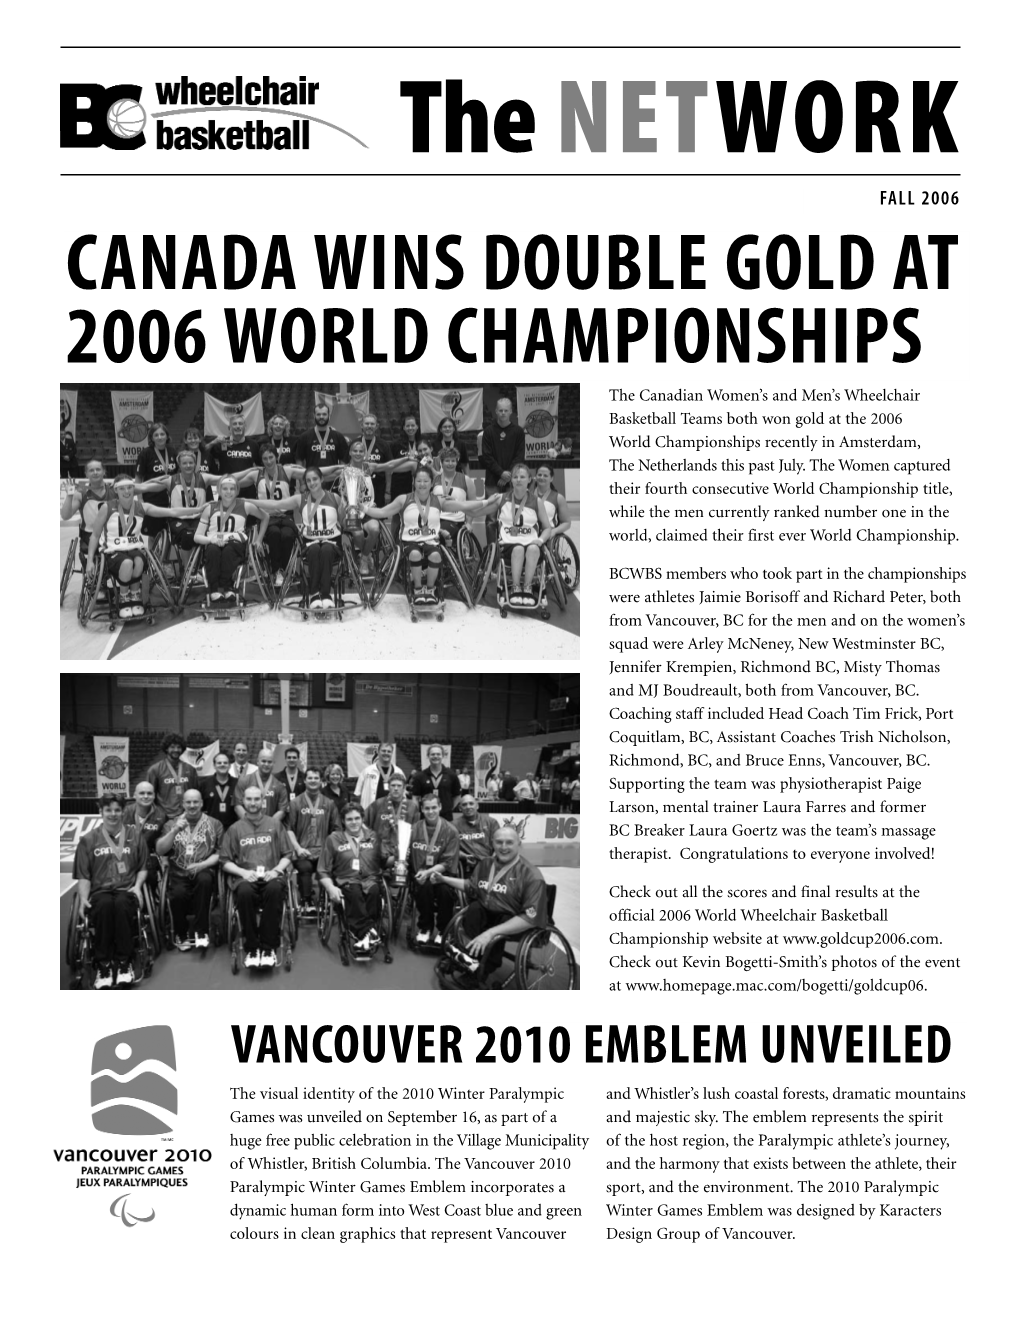 BCWBS Fall 2006 Newsletter 10/16/06 5:54 PM Page 1